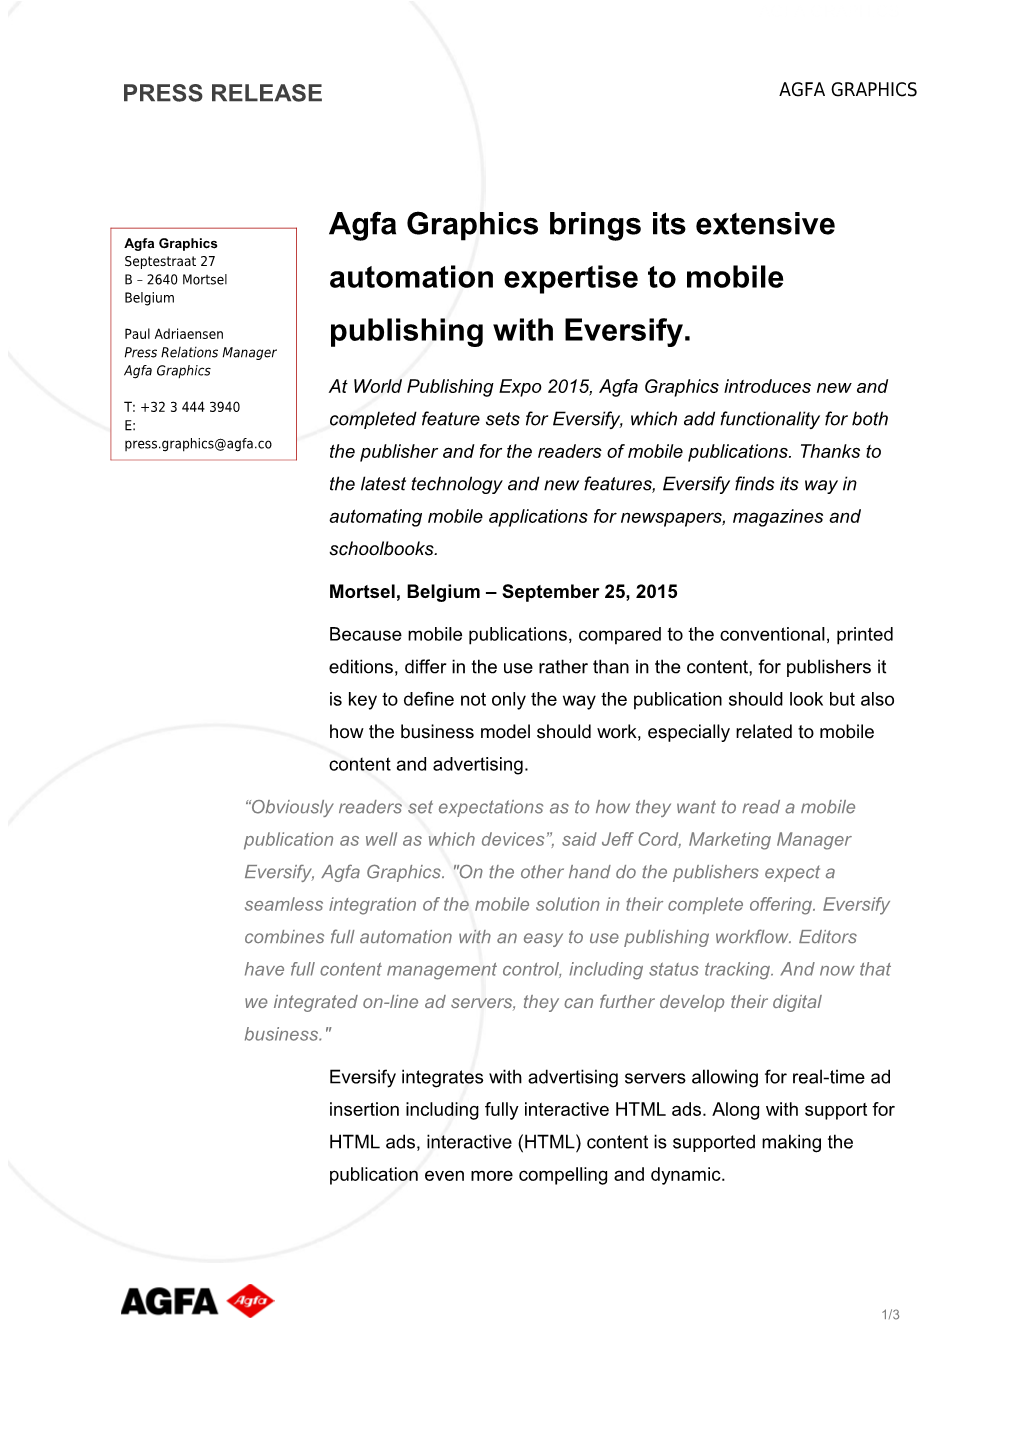 Agfa Graphics Brings Its Extensive Automation Expertise to Mobile Publishing with Eversify